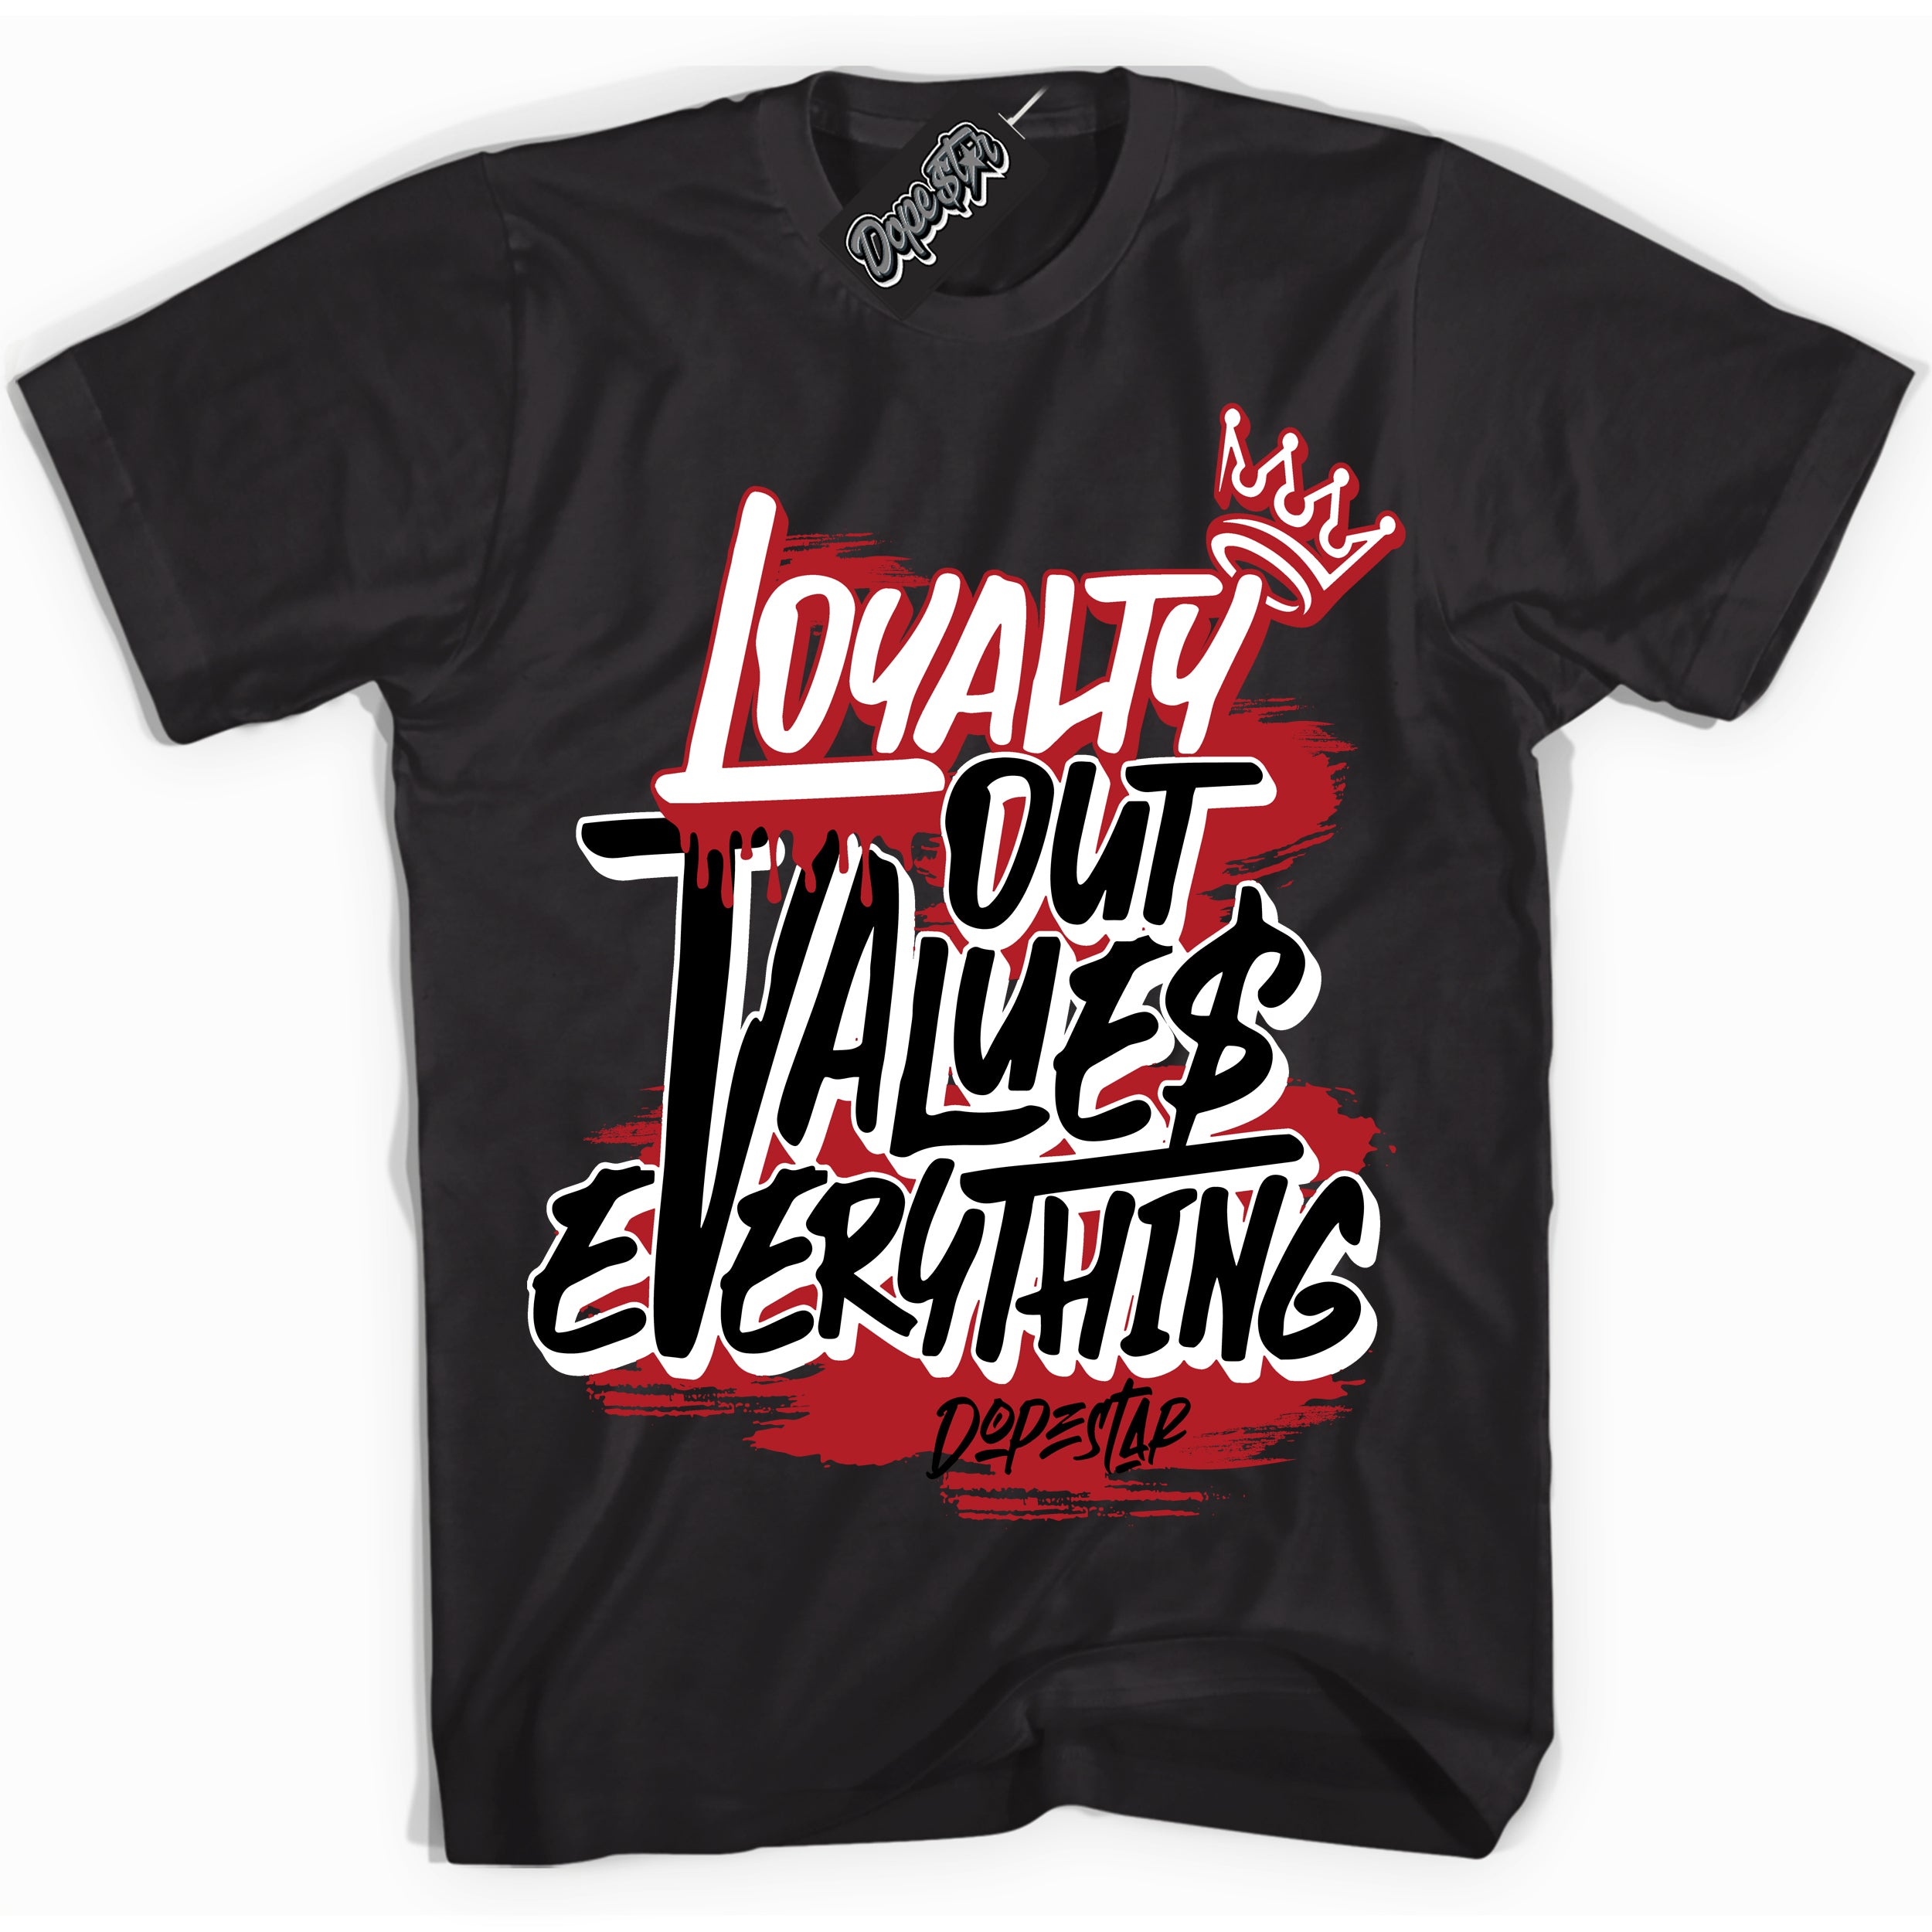 Cool Black Shirt with “ Loyalty Out Values Everything” design that perfectly matches Red Swoosh Panda  Sneakers.